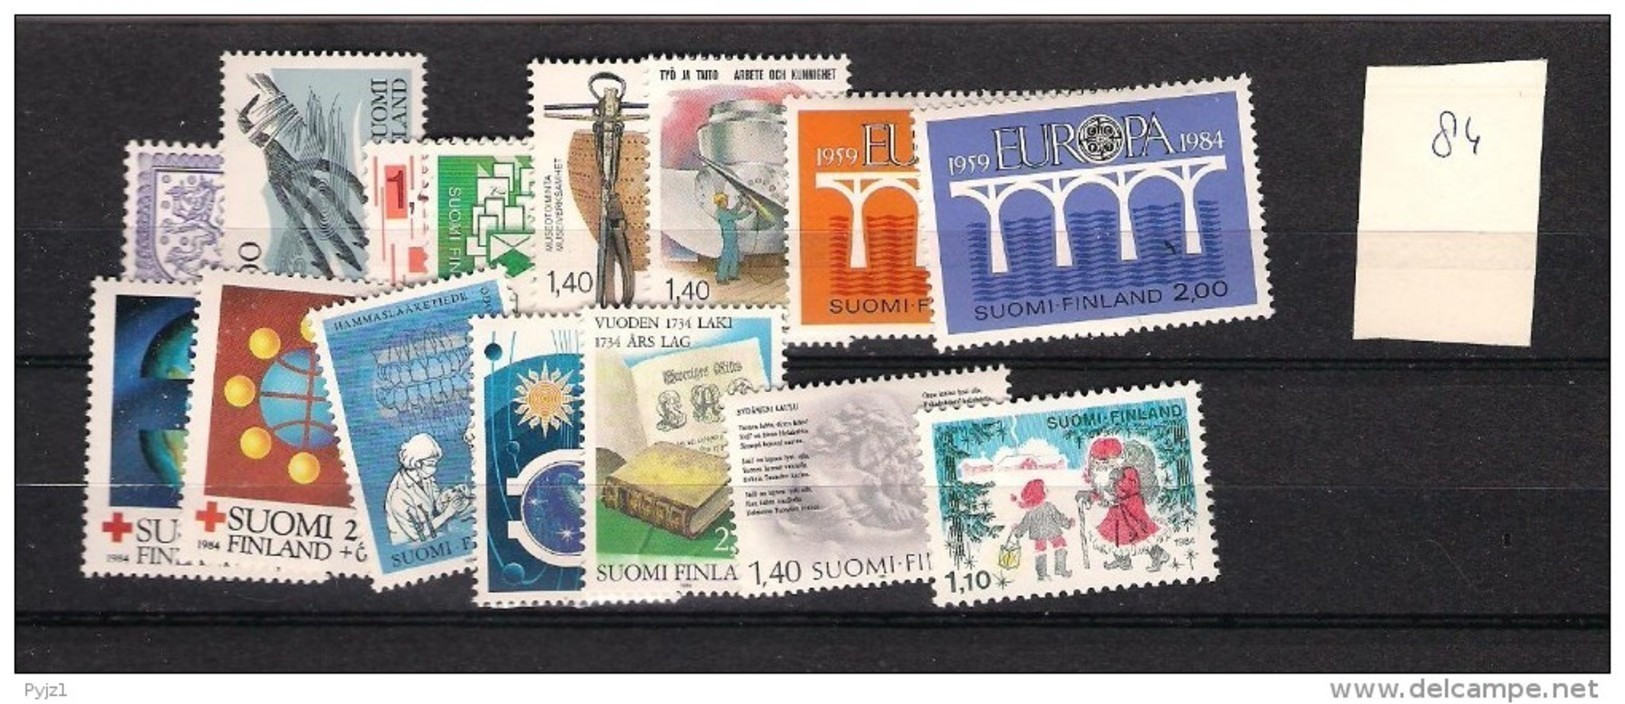 1984 MNH Finland, Finnland, Year Complete According To Michel, Postfris - Annate Complete